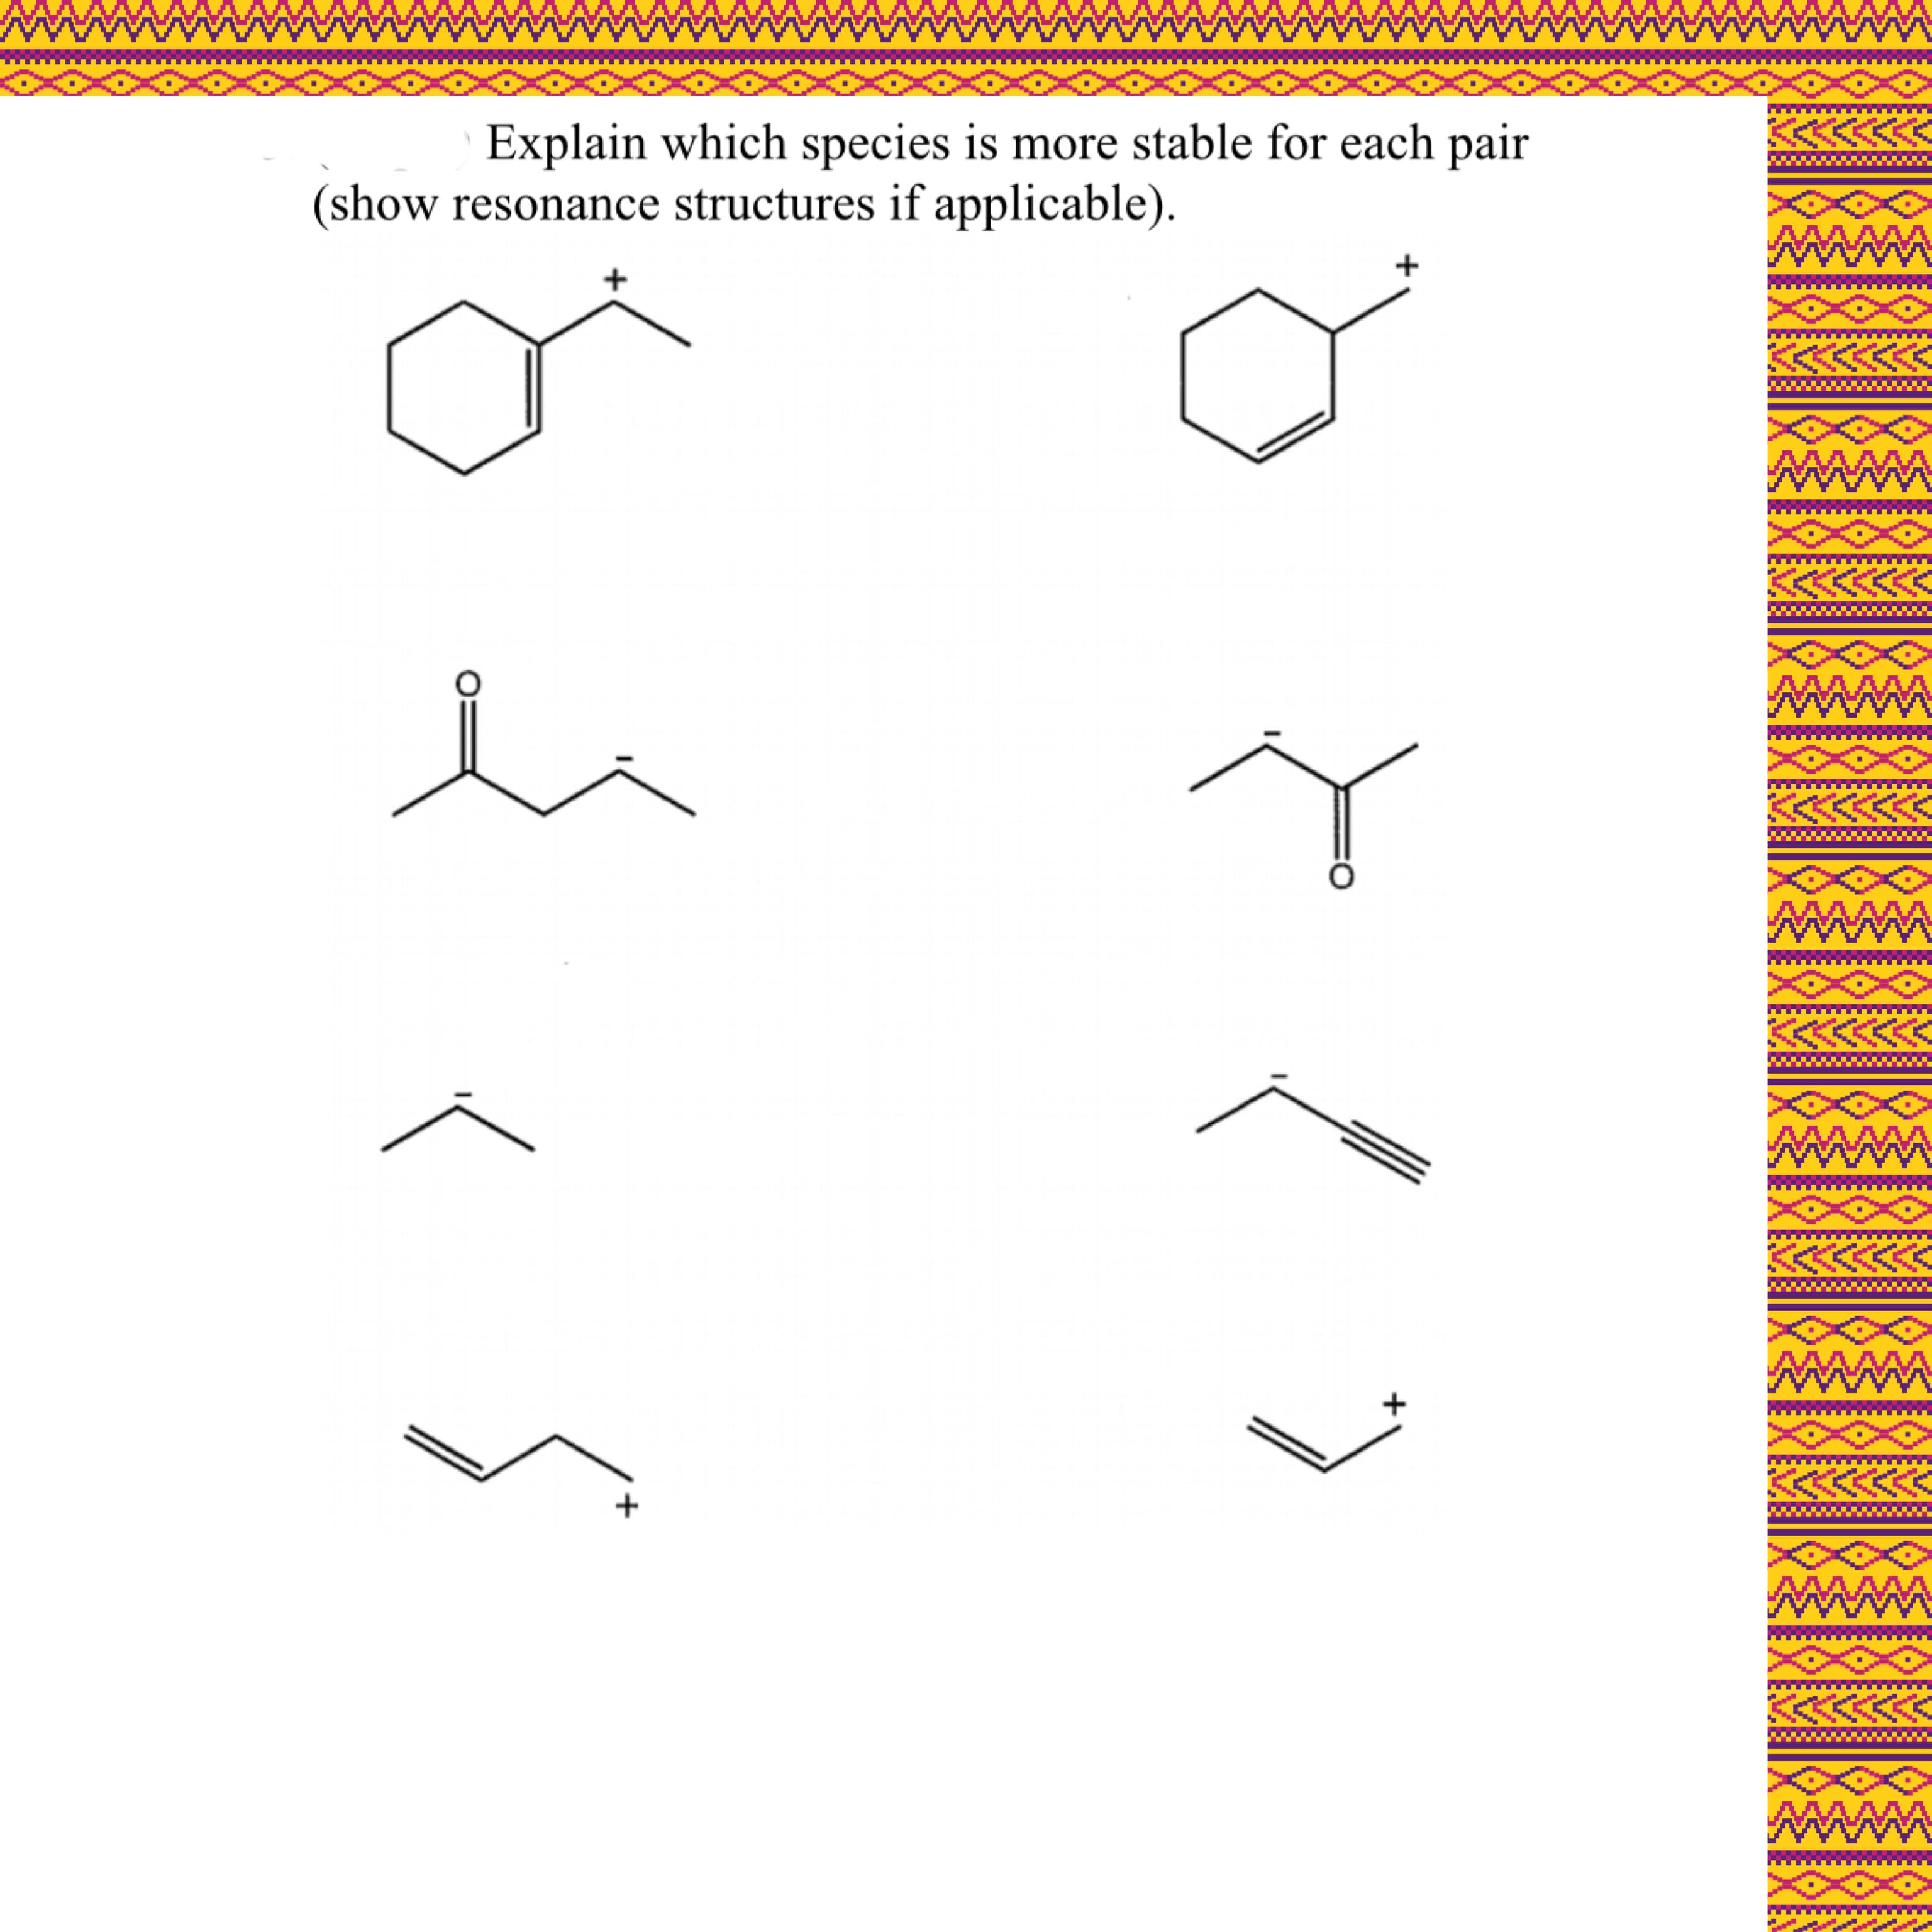 Explain which species is more stable for each pair
(show resonance structures if applicable).
+
